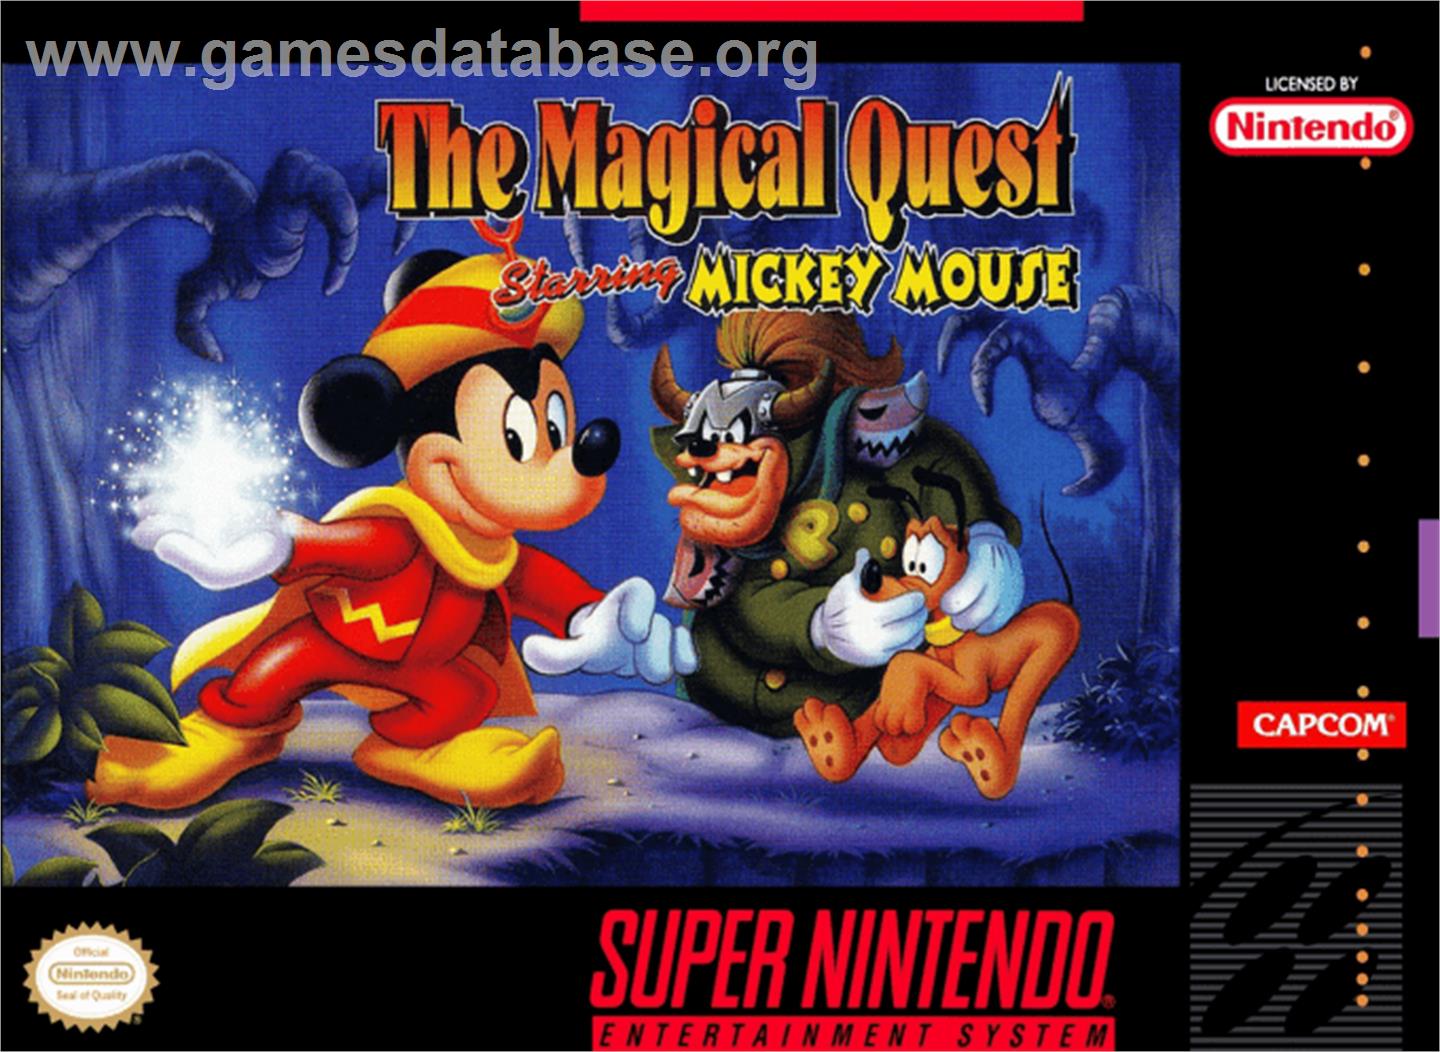 The Magical Quest Starring Mickey Mouse - Nintendo SNES - Artwork - Box